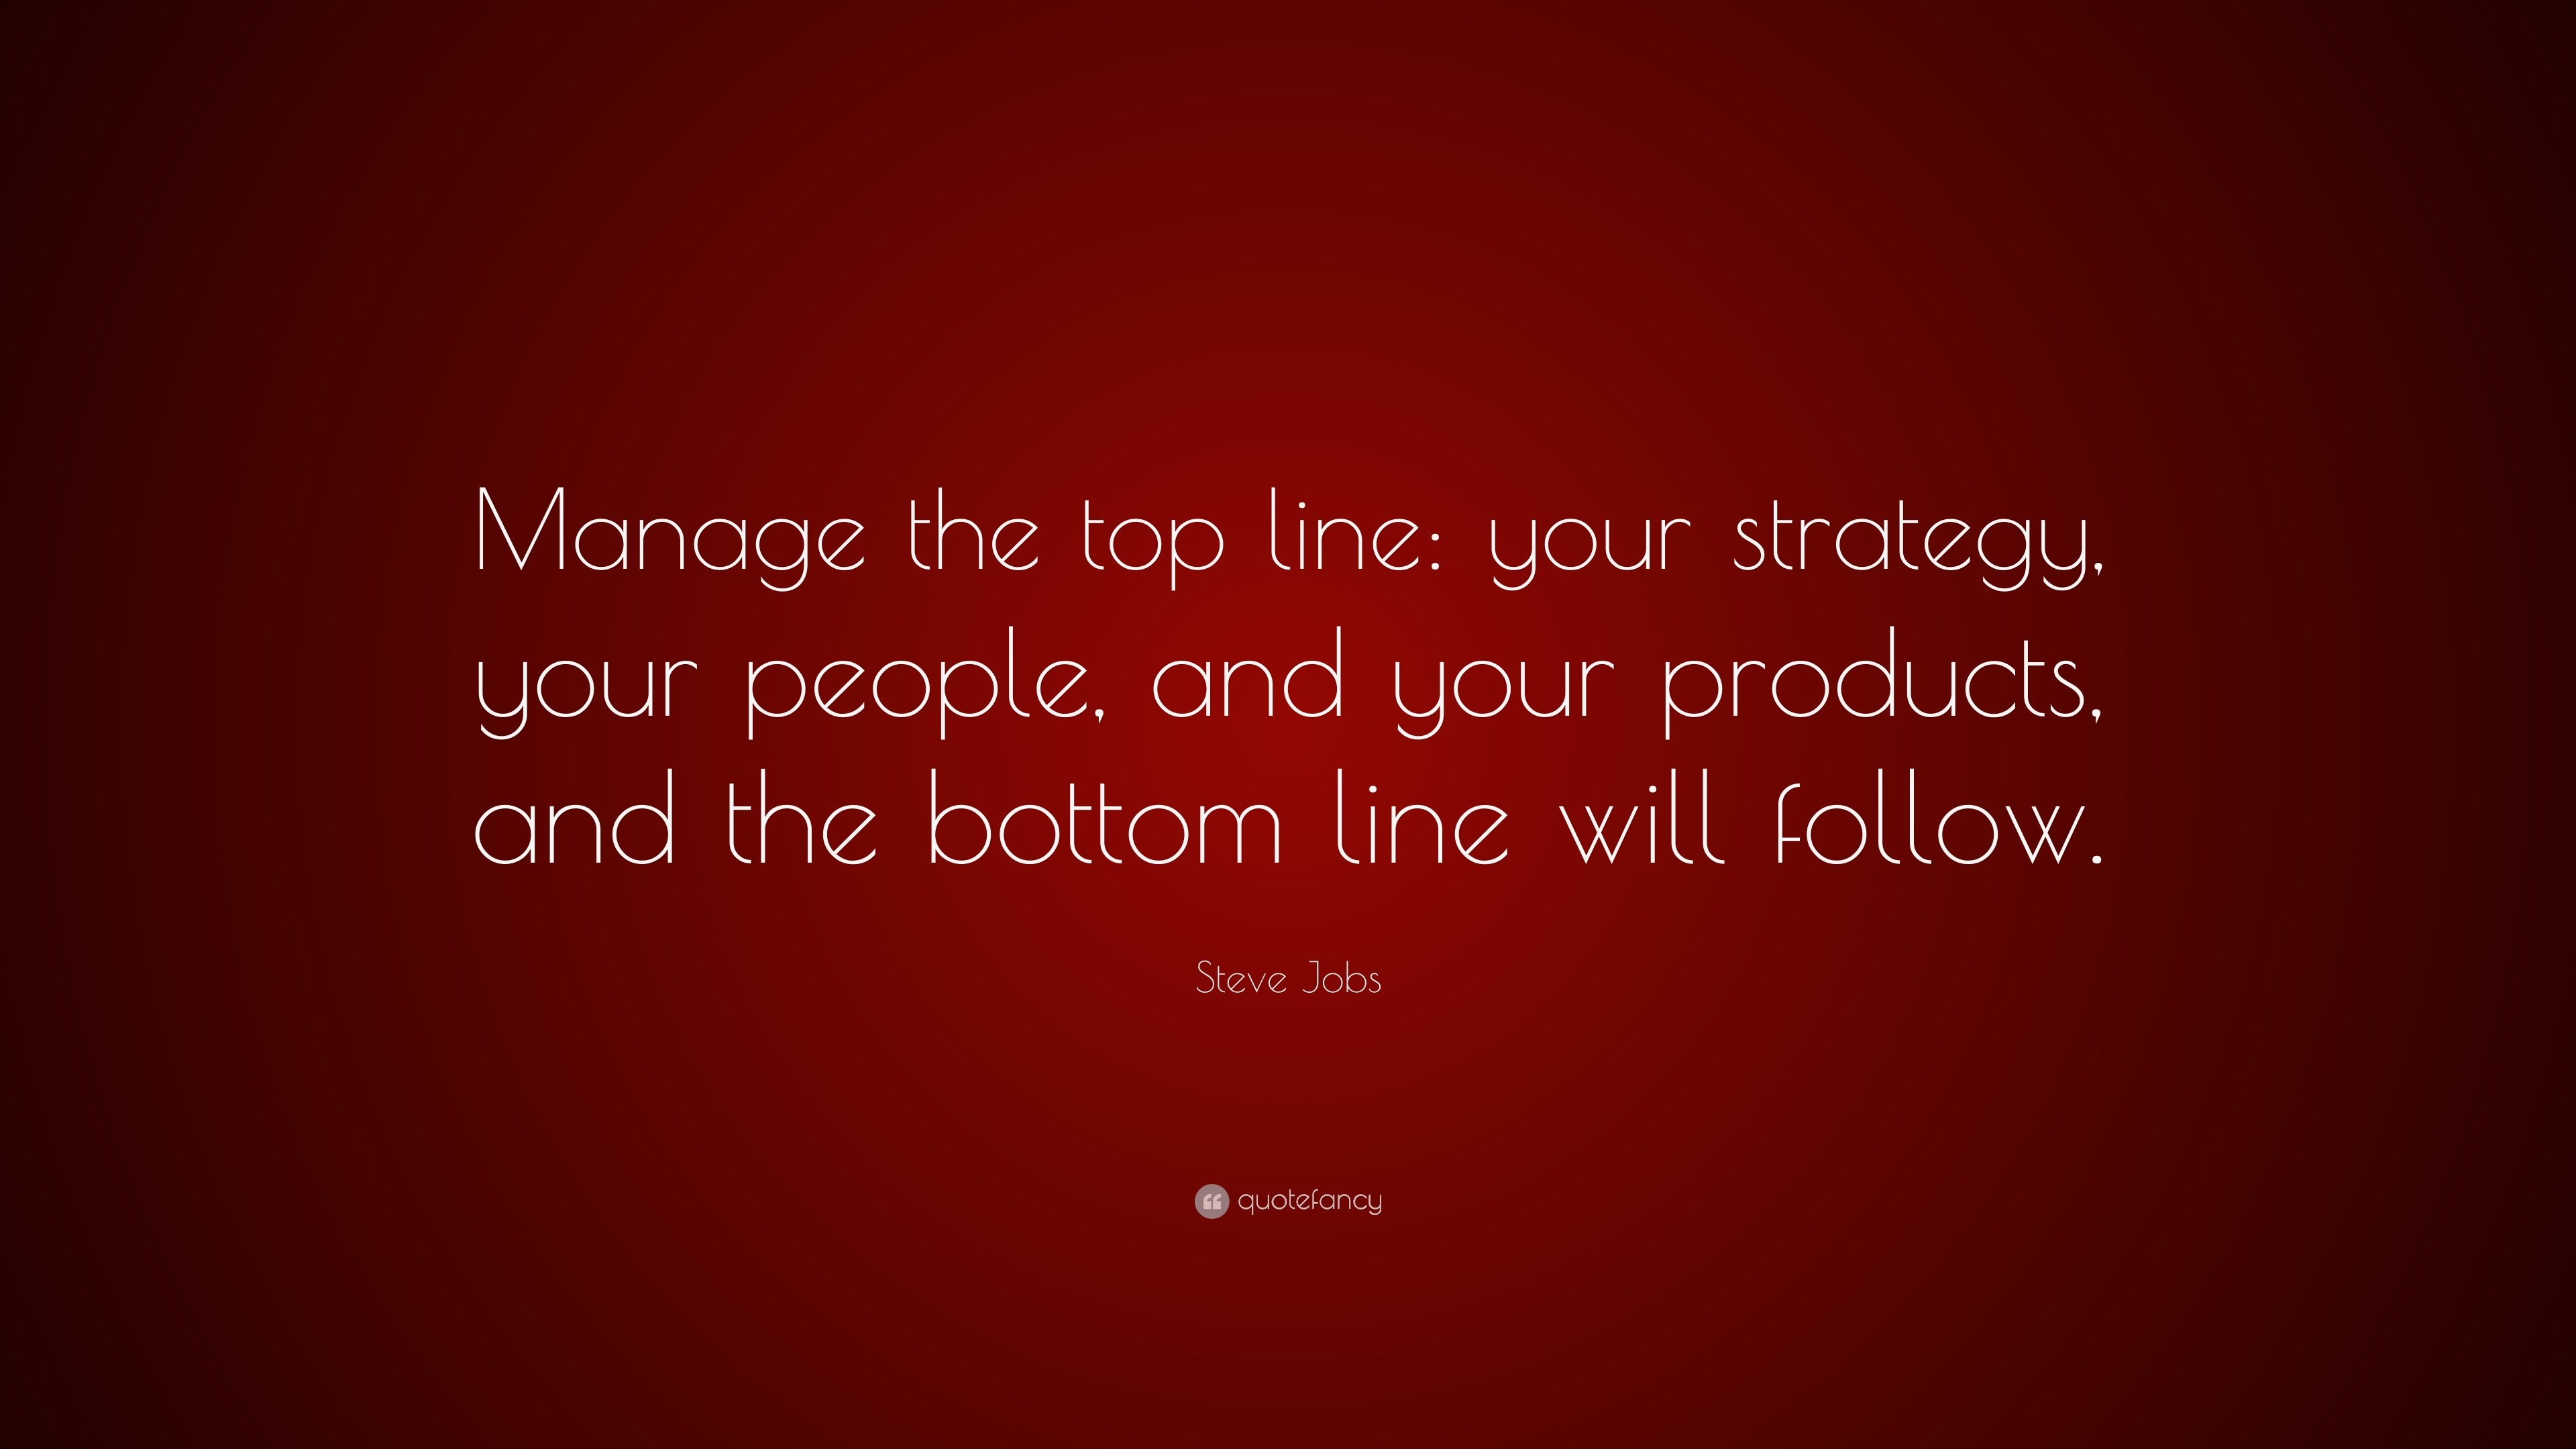 Steve Jobs Quote Manage The Top Line Your Strategy Your People And Your Products And The